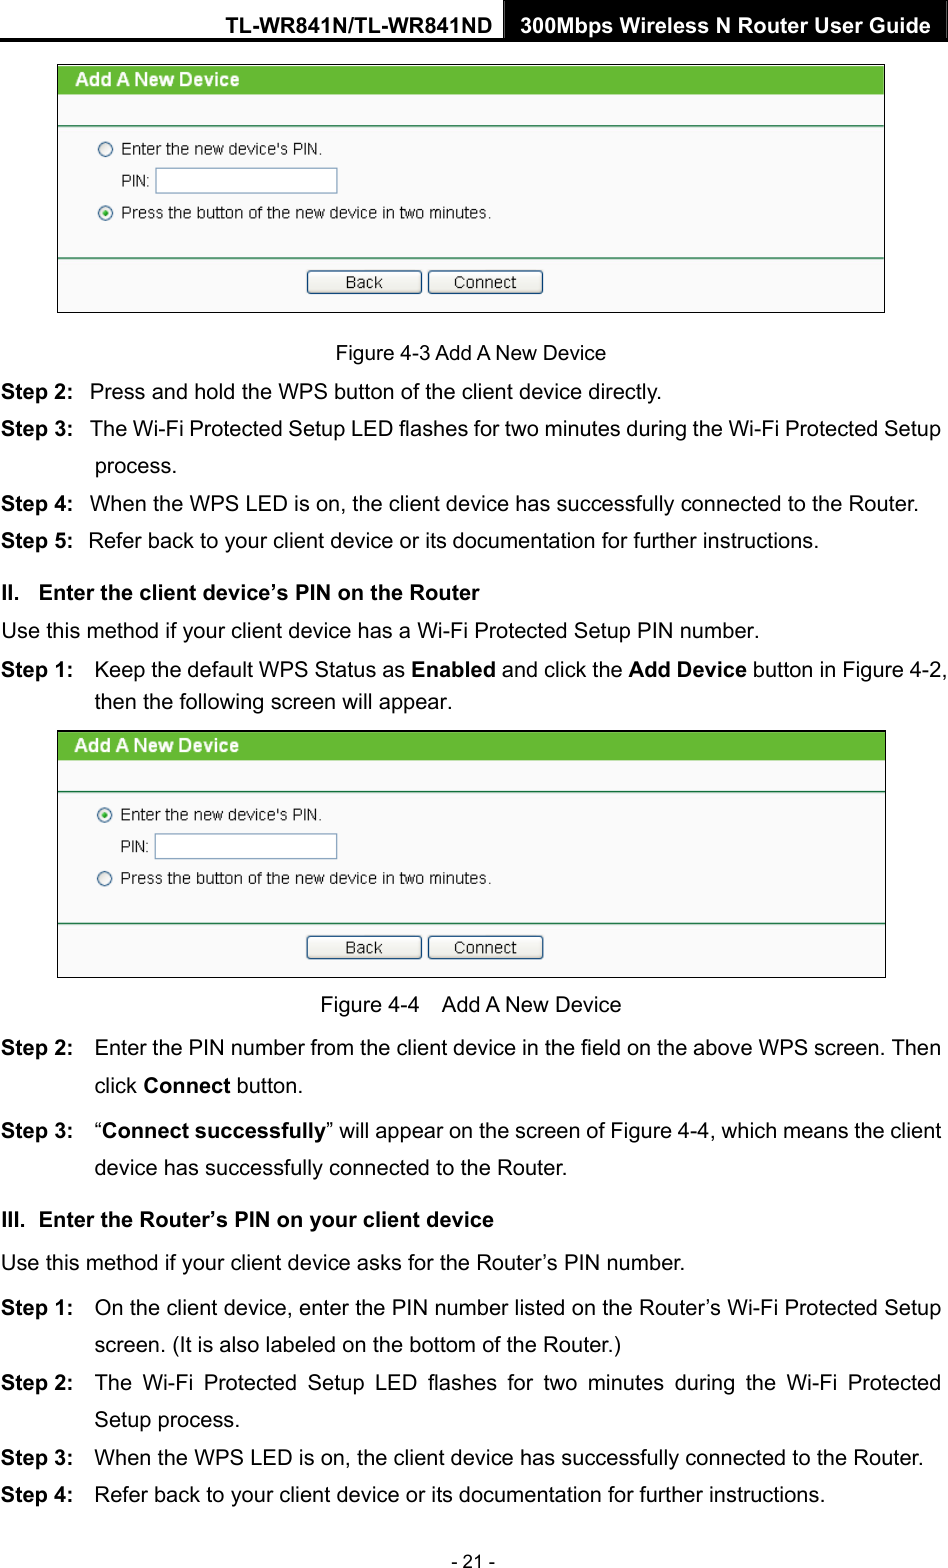 TL-WR841N/TL-WR841ND 300Mbps Wireless N Router User Guide - 21 -  Figure 4-3 Add A New Device Step 2:  Press and hold the WPS button of the client device directly.   Step 3:  The Wi-Fi Protected Setup LED flashes for two minutes during the Wi-Fi Protected Setup process.  Step 4:  When the WPS LED is on, the client device has successfully connected to the Router.   Step 5:  Refer back to your client device or its documentation for further instructions.   II.  Enter the client device’s PIN on the Router Use this method if your client device has a Wi-Fi Protected Setup PIN number. Step 1:  Keep the default WPS Status as Enabled and click the Add Device button in Figure 4-2, then the following screen will appear.    Figure 4-4  Add A New Device Step 2:  Enter the PIN number from the client device in the field on the above WPS screen. Then click Connect button. Step 3:  “Connect successfully” will appear on the screen of Figure 4-4, which means the client device has successfully connected to the Router. III.  Enter the Router’s PIN on your client device Use this method if your client device asks for the Router’s PIN number.   Step 1:  On the client device, enter the PIN number listed on the Router’s Wi-Fi Protected Setup screen. (It is also labeled on the bottom of the Router.) Step 2:  The Wi-Fi Protected Setup LED flashes for two minutes during the Wi-Fi Protected Setup process.   Step 3:  When the WPS LED is on, the client device has successfully connected to the Router.   Step 4:  Refer back to your client device or its documentation for further instructions.   